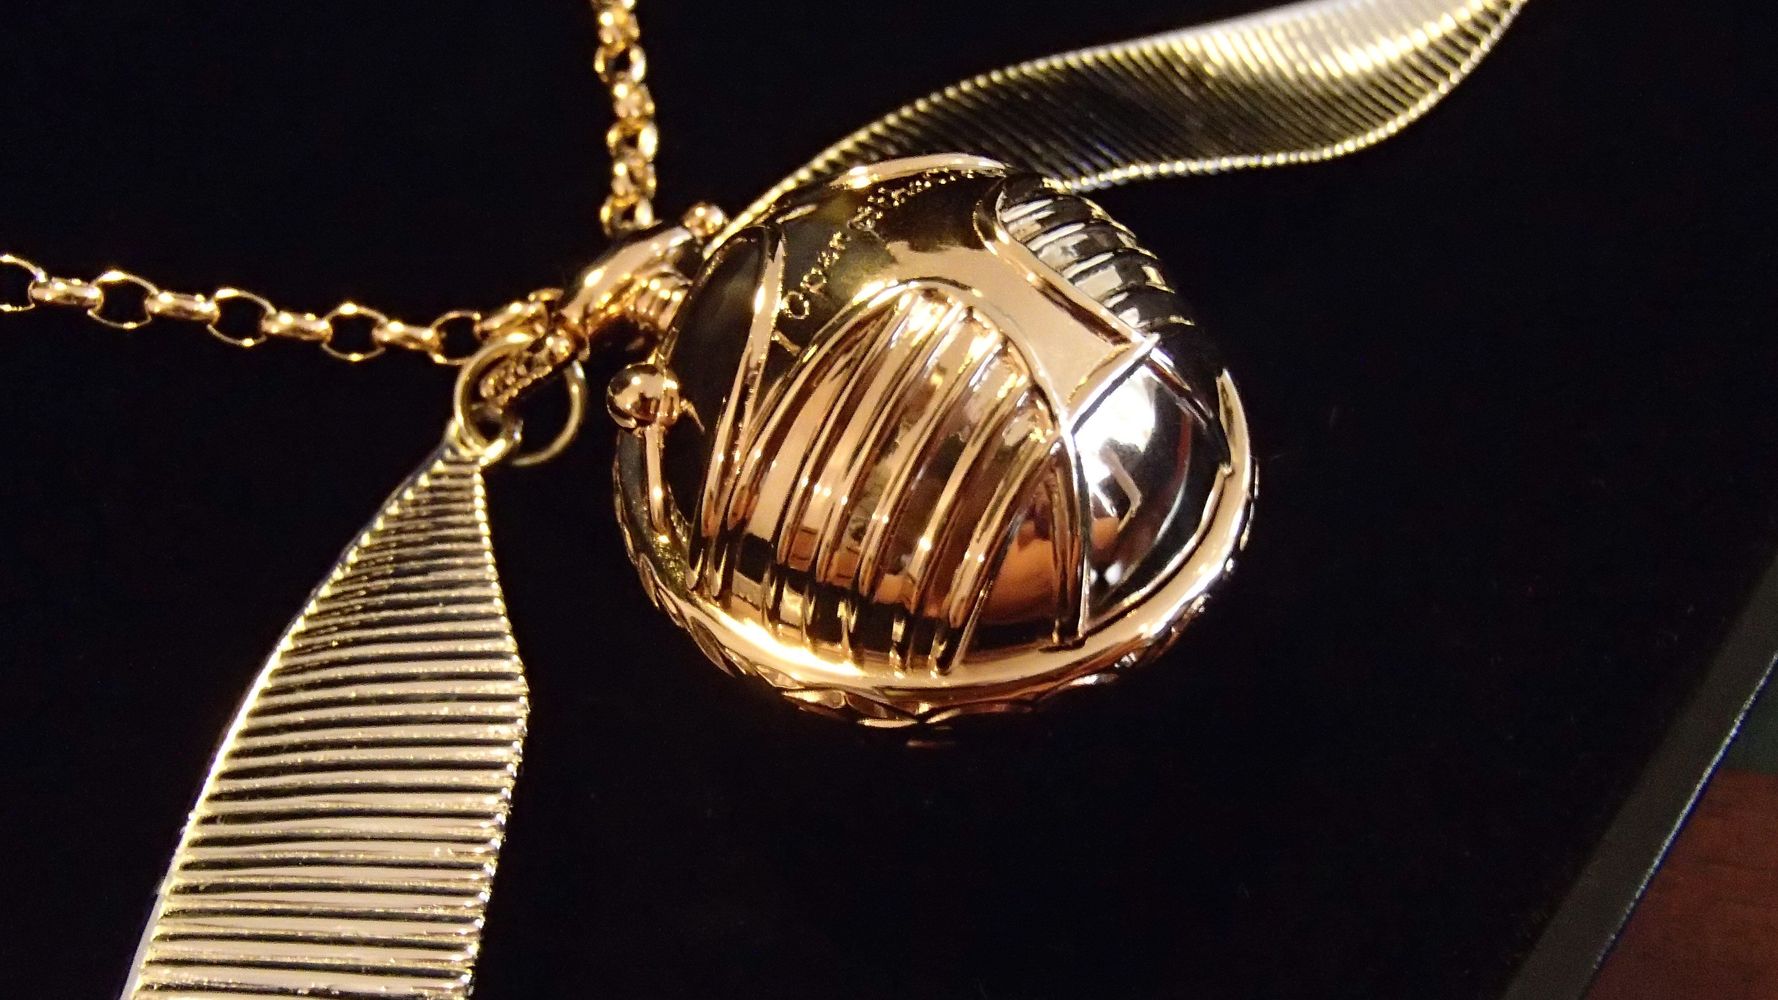 This Golden Snitch Ring Box Comes With A Magical | HuffPost Life